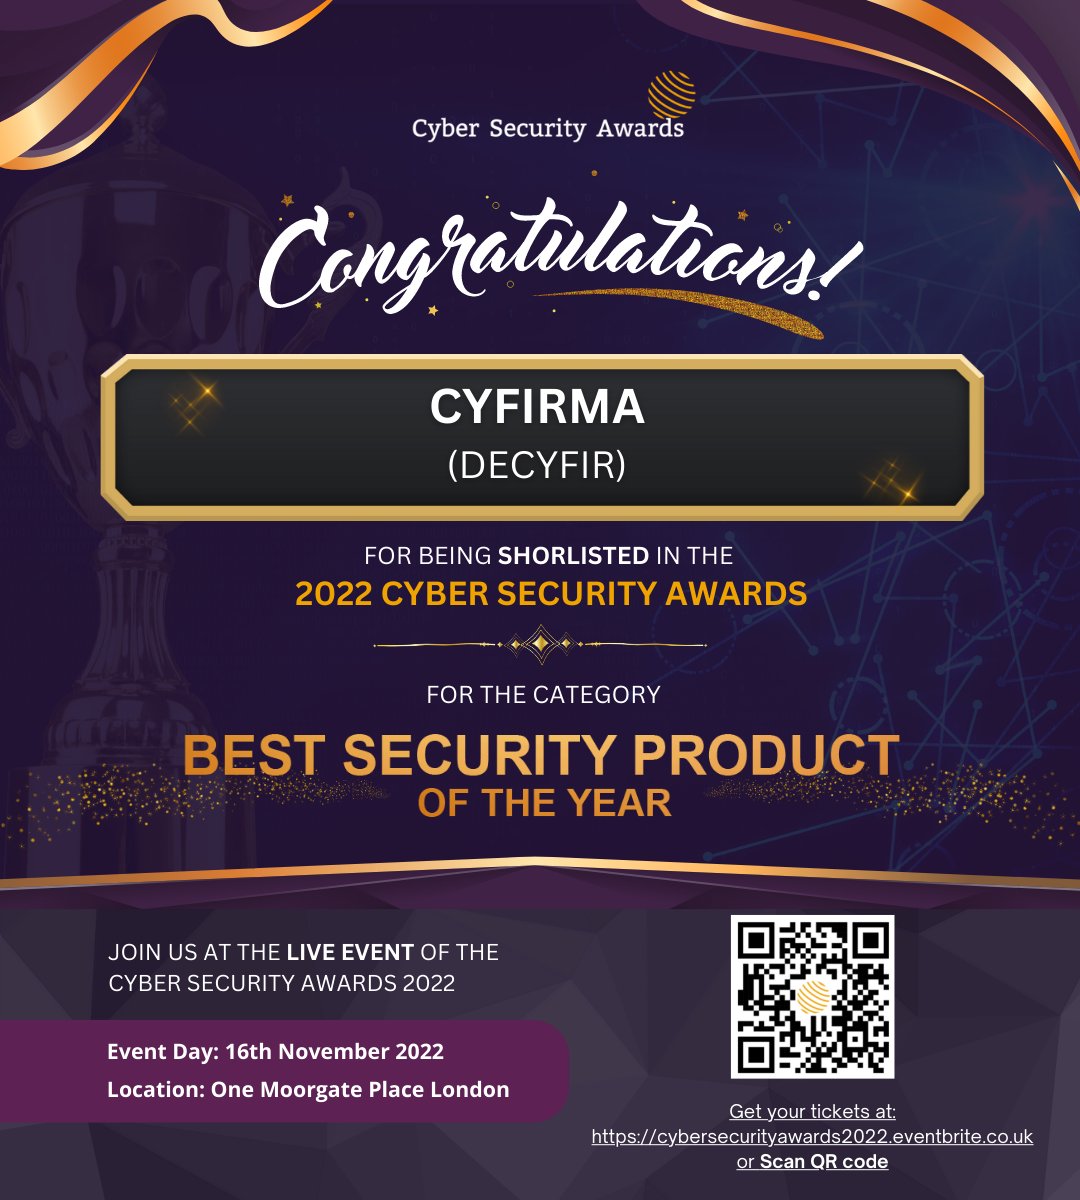 CYFIRMA's core platform for #ExternalThreatLandscapeManagement #ETLM #DeCYFIR has been shortlisted in the upcoming #2022CyberSecurityAwards. We are vying for the #BestSecurityProductOfTheYear award!